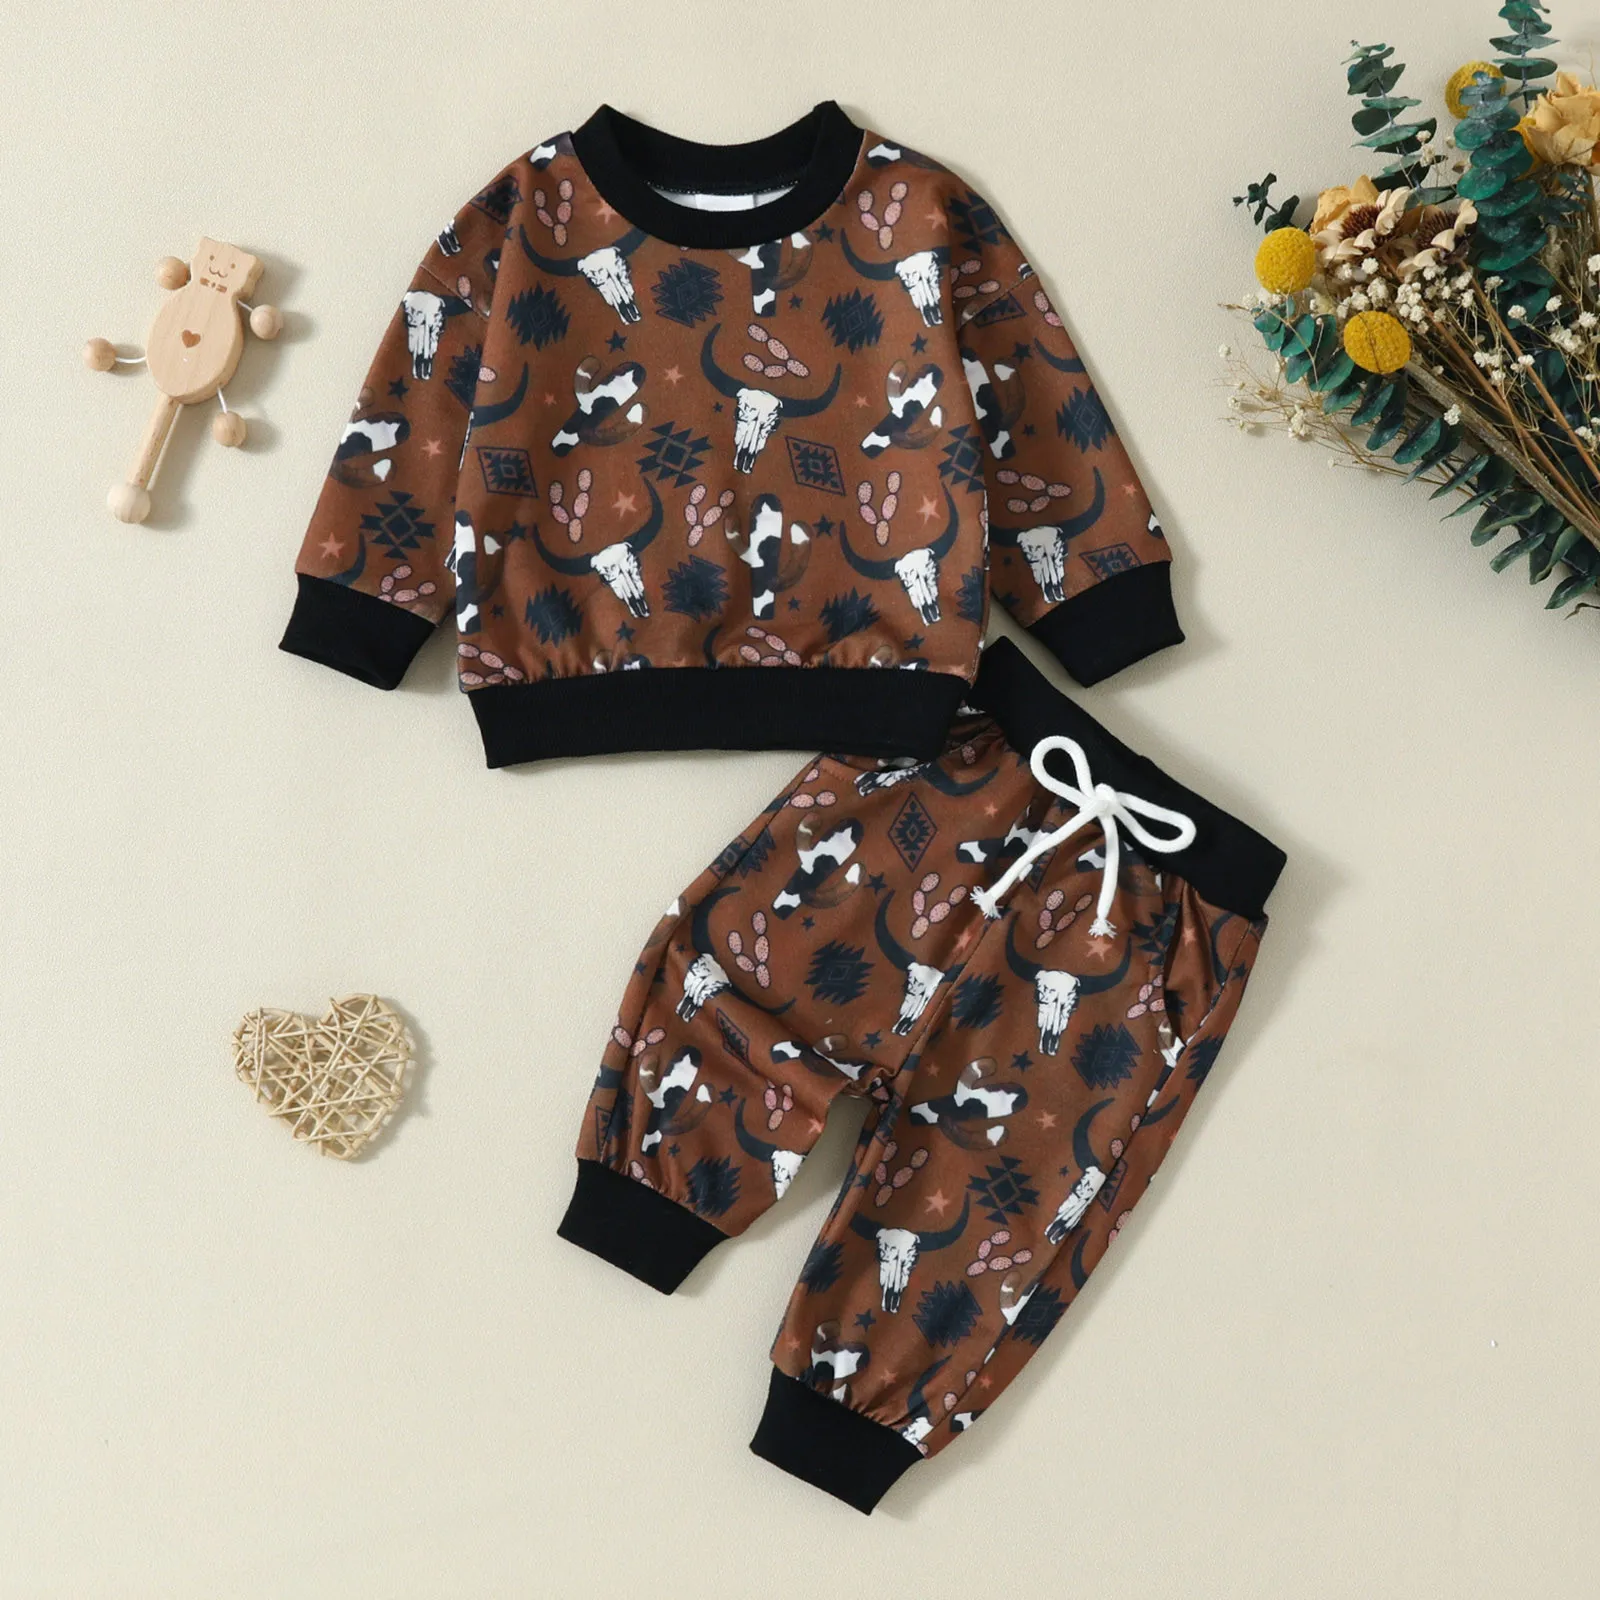 

Newborn Infant Baby Boys Clothes Sets Cattle Head Cactus Print Long Sleeve Sweatshirt Pants Fall Outfit 2Pcs Baby Child Clothing